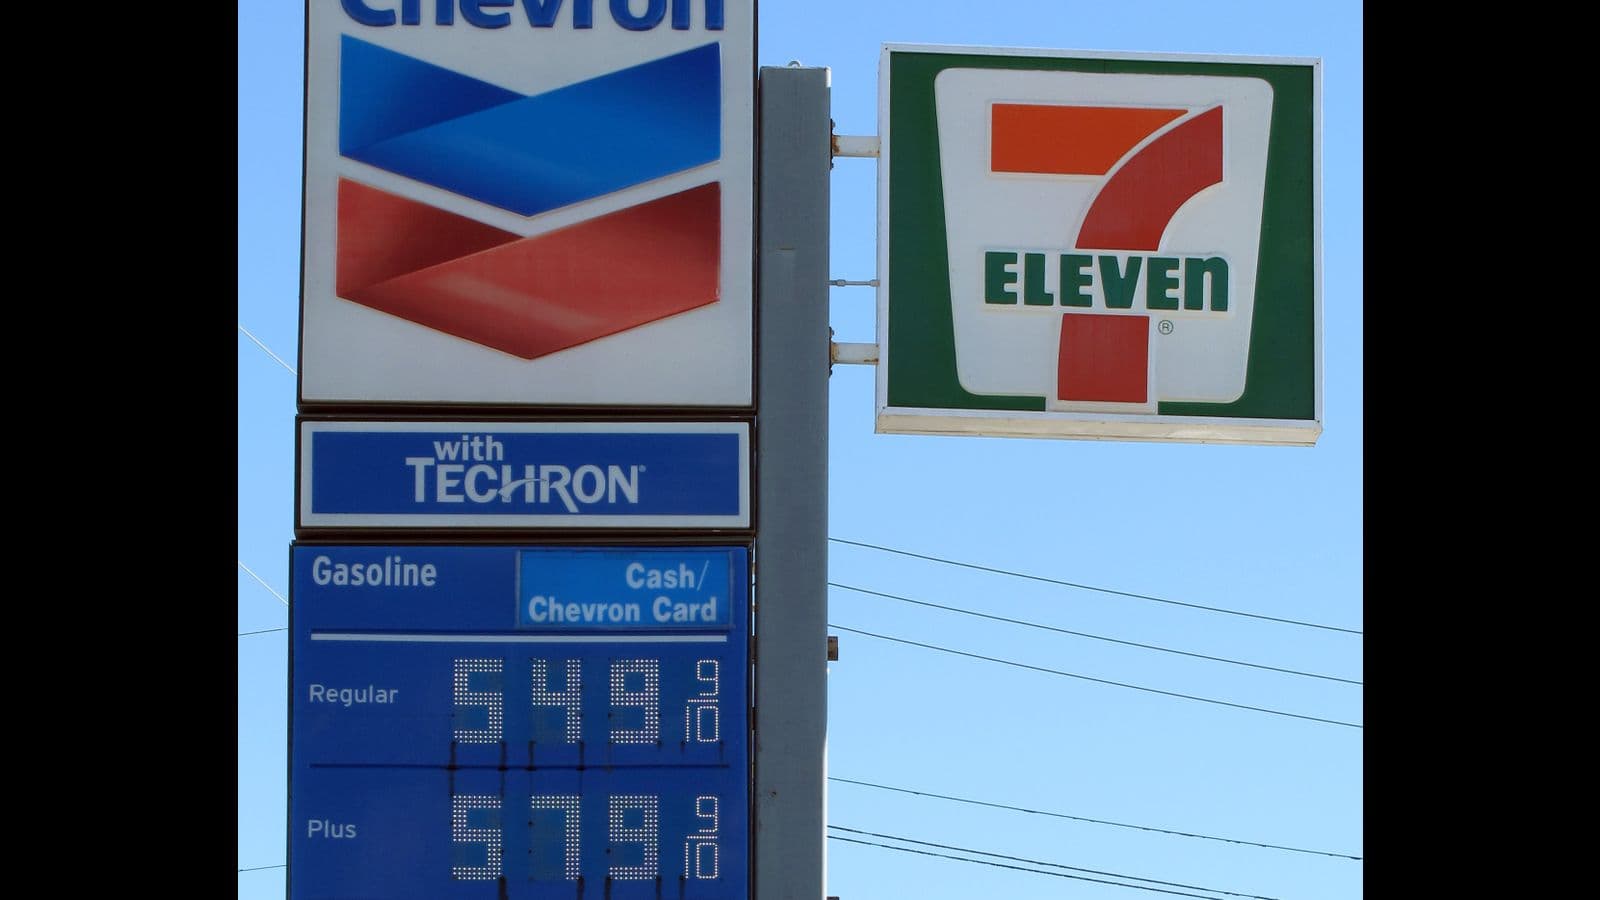 Chevron gas station sign with gasoline prices, November 2022, Los Angeles.